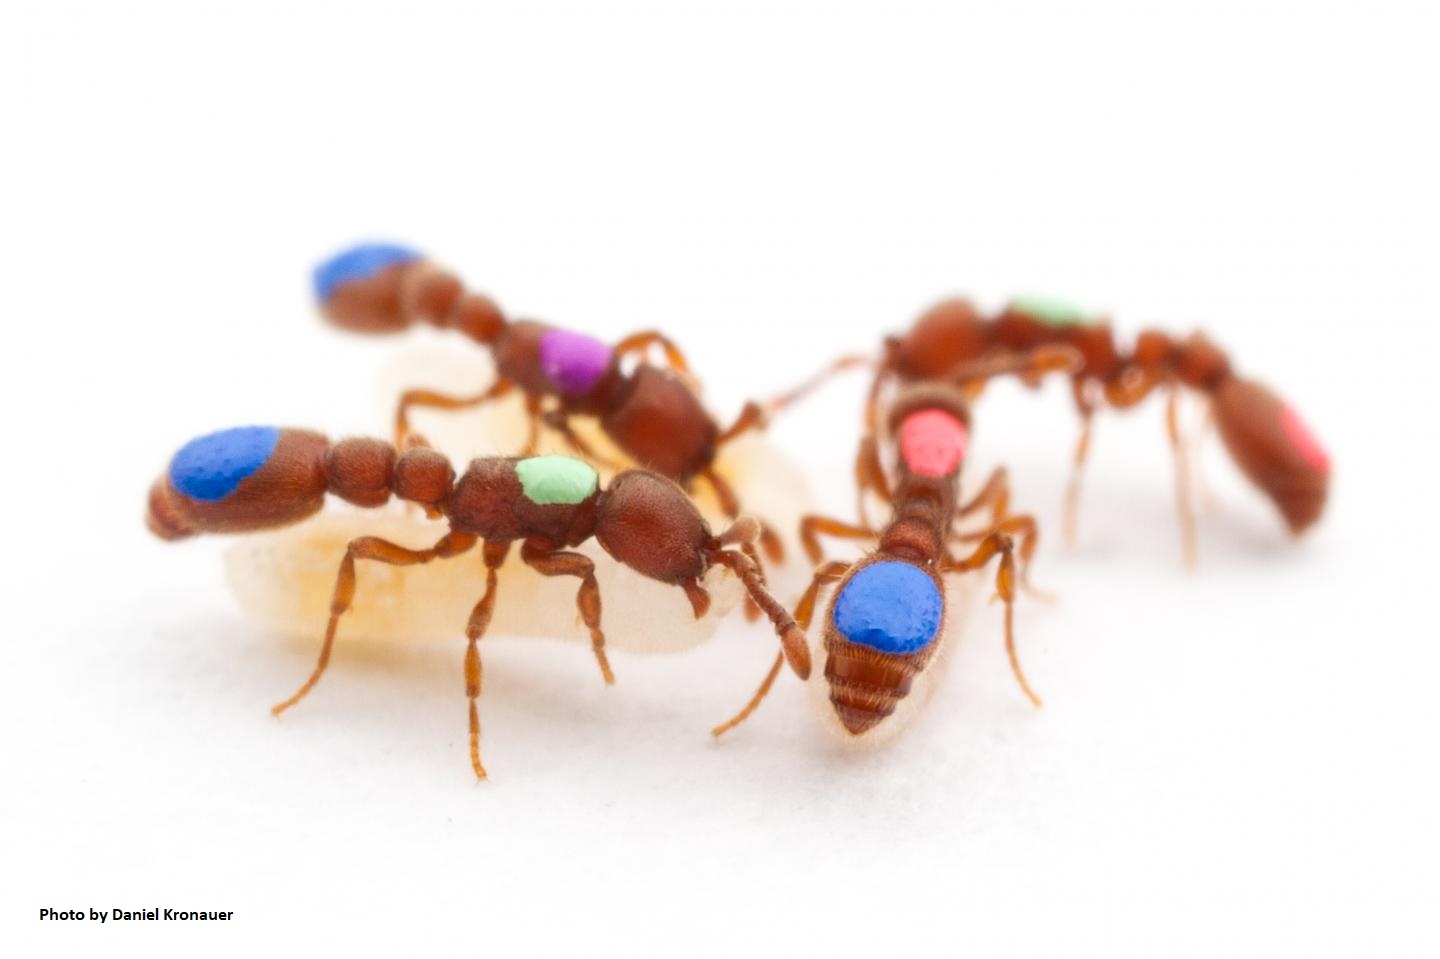 clonal raider ants with painted orange, purple, green, and blue thorax and abdomens